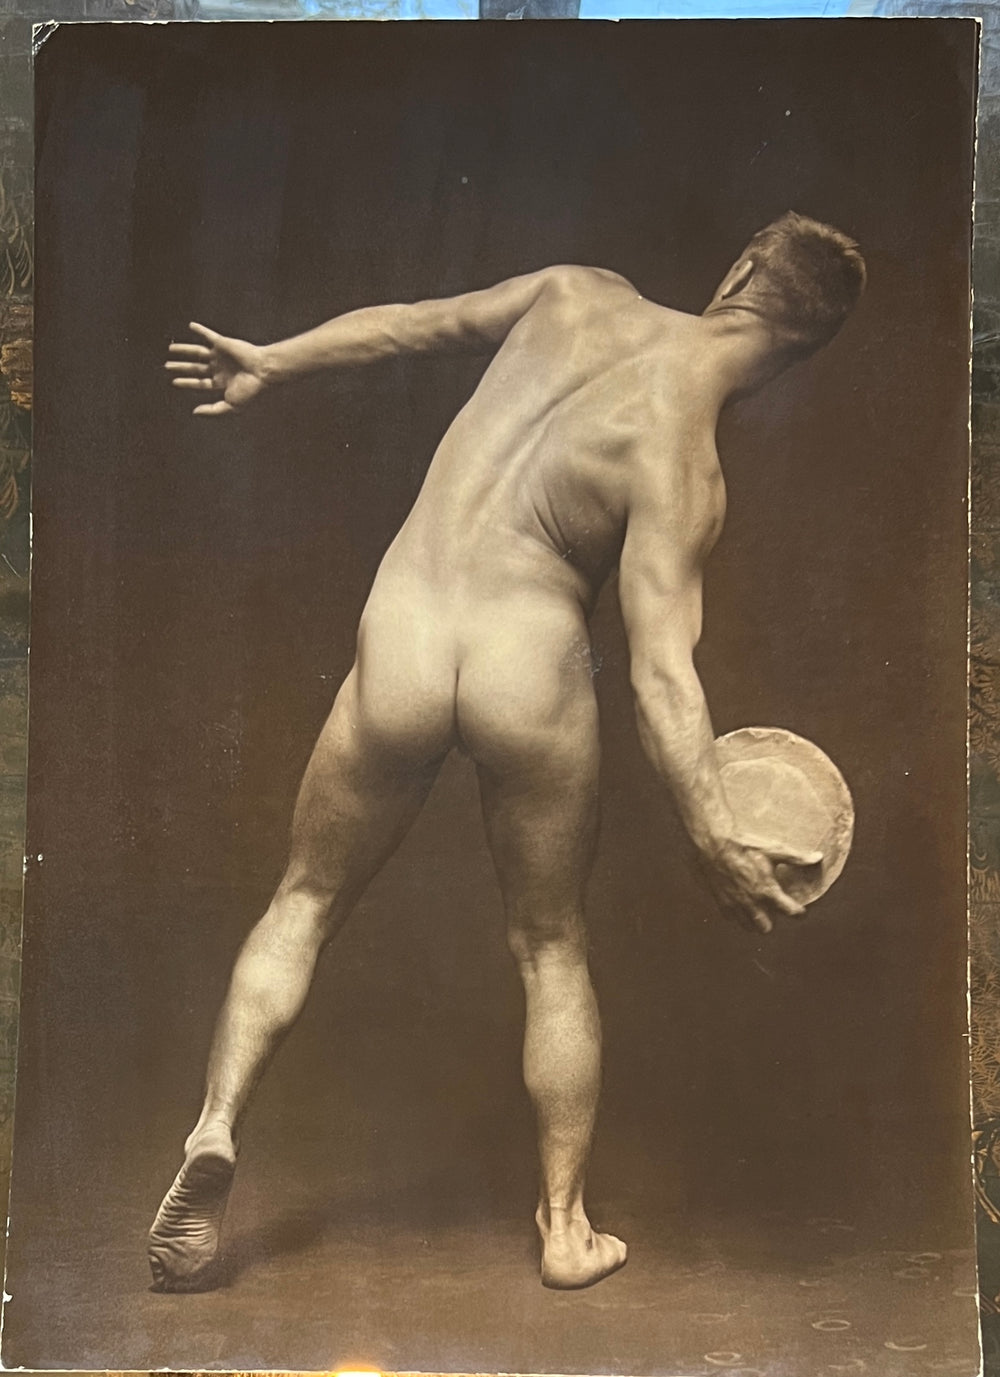 James Perret - Pair of large 30's Athletes photographs